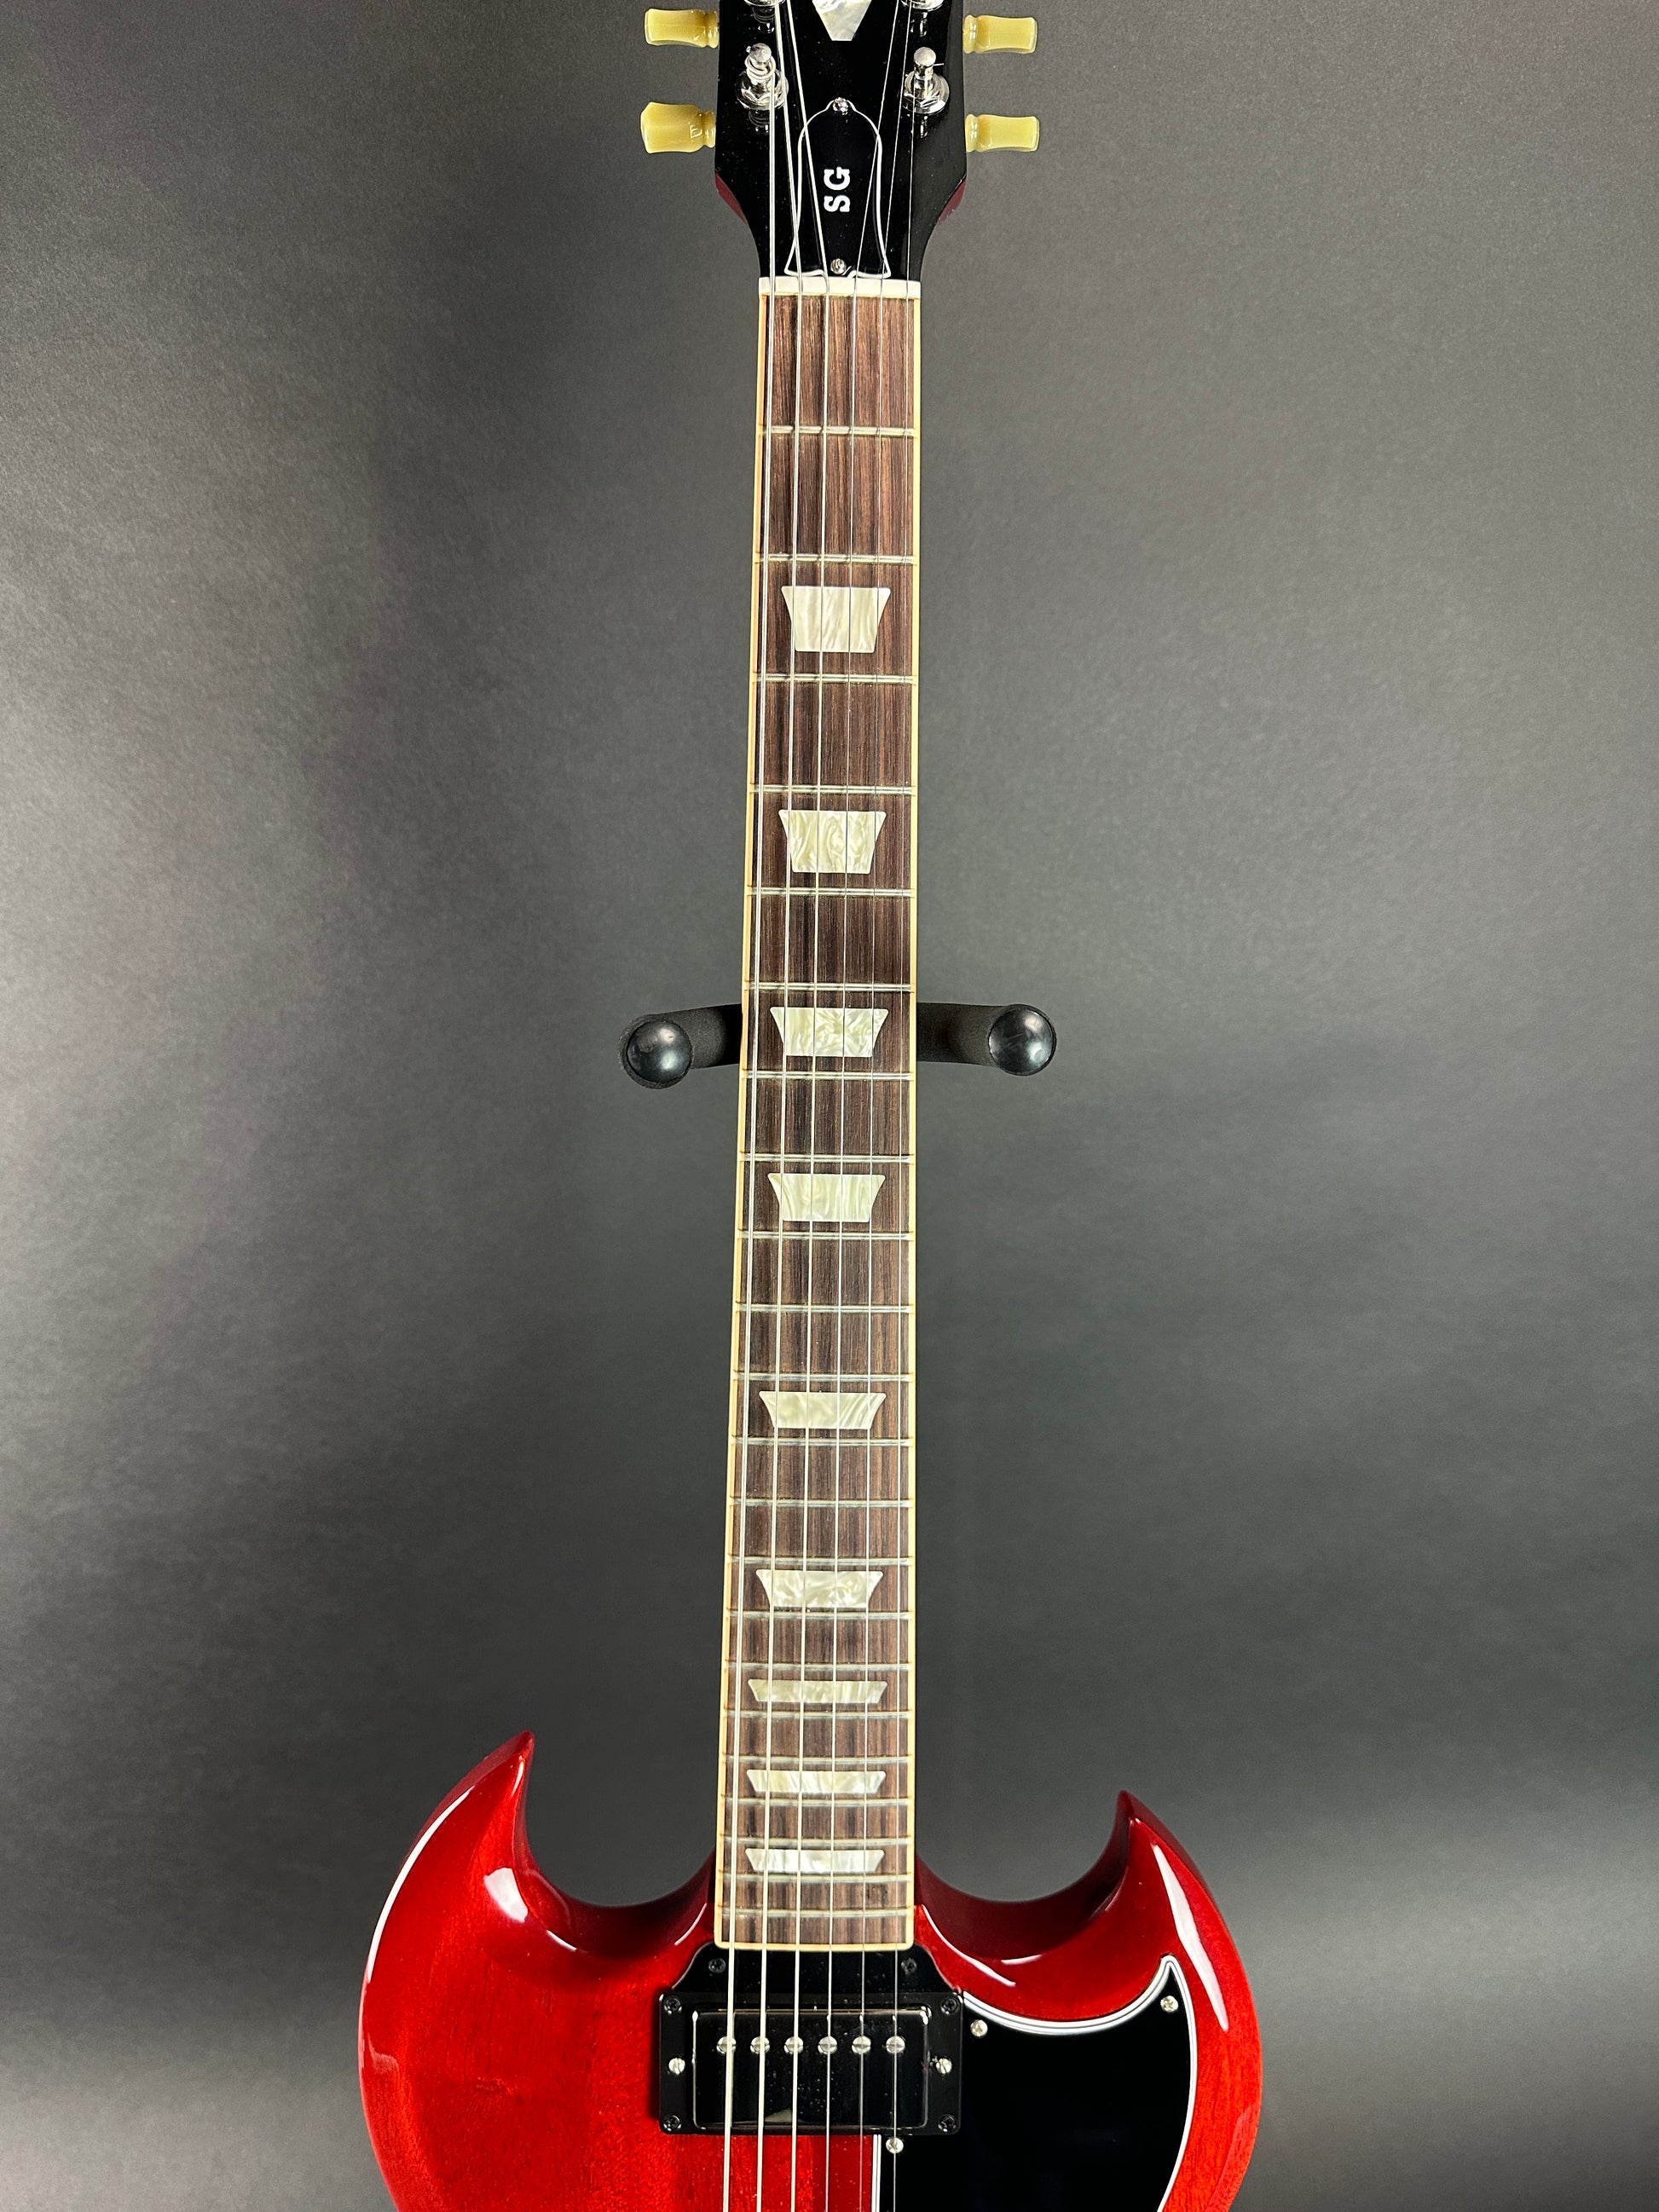 Fretboard of Used 2019 Gibson '61 Reissue SG Cherry.